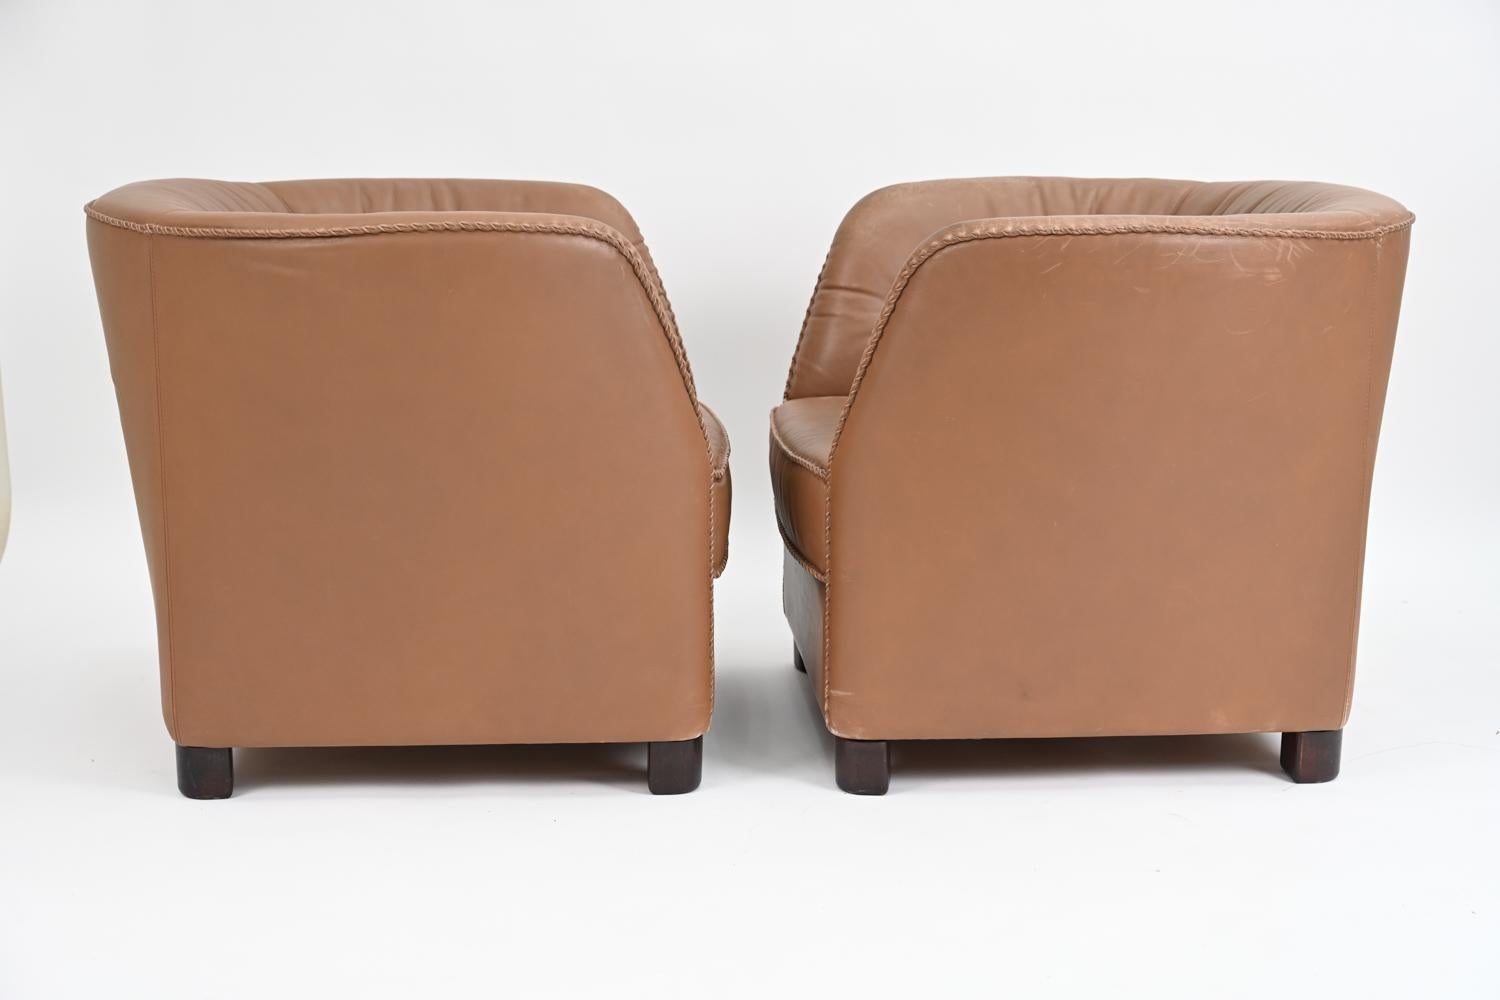 Pair of Danish Modern Leather Whipstitched Lounge Chairs by Berg Furniture 6